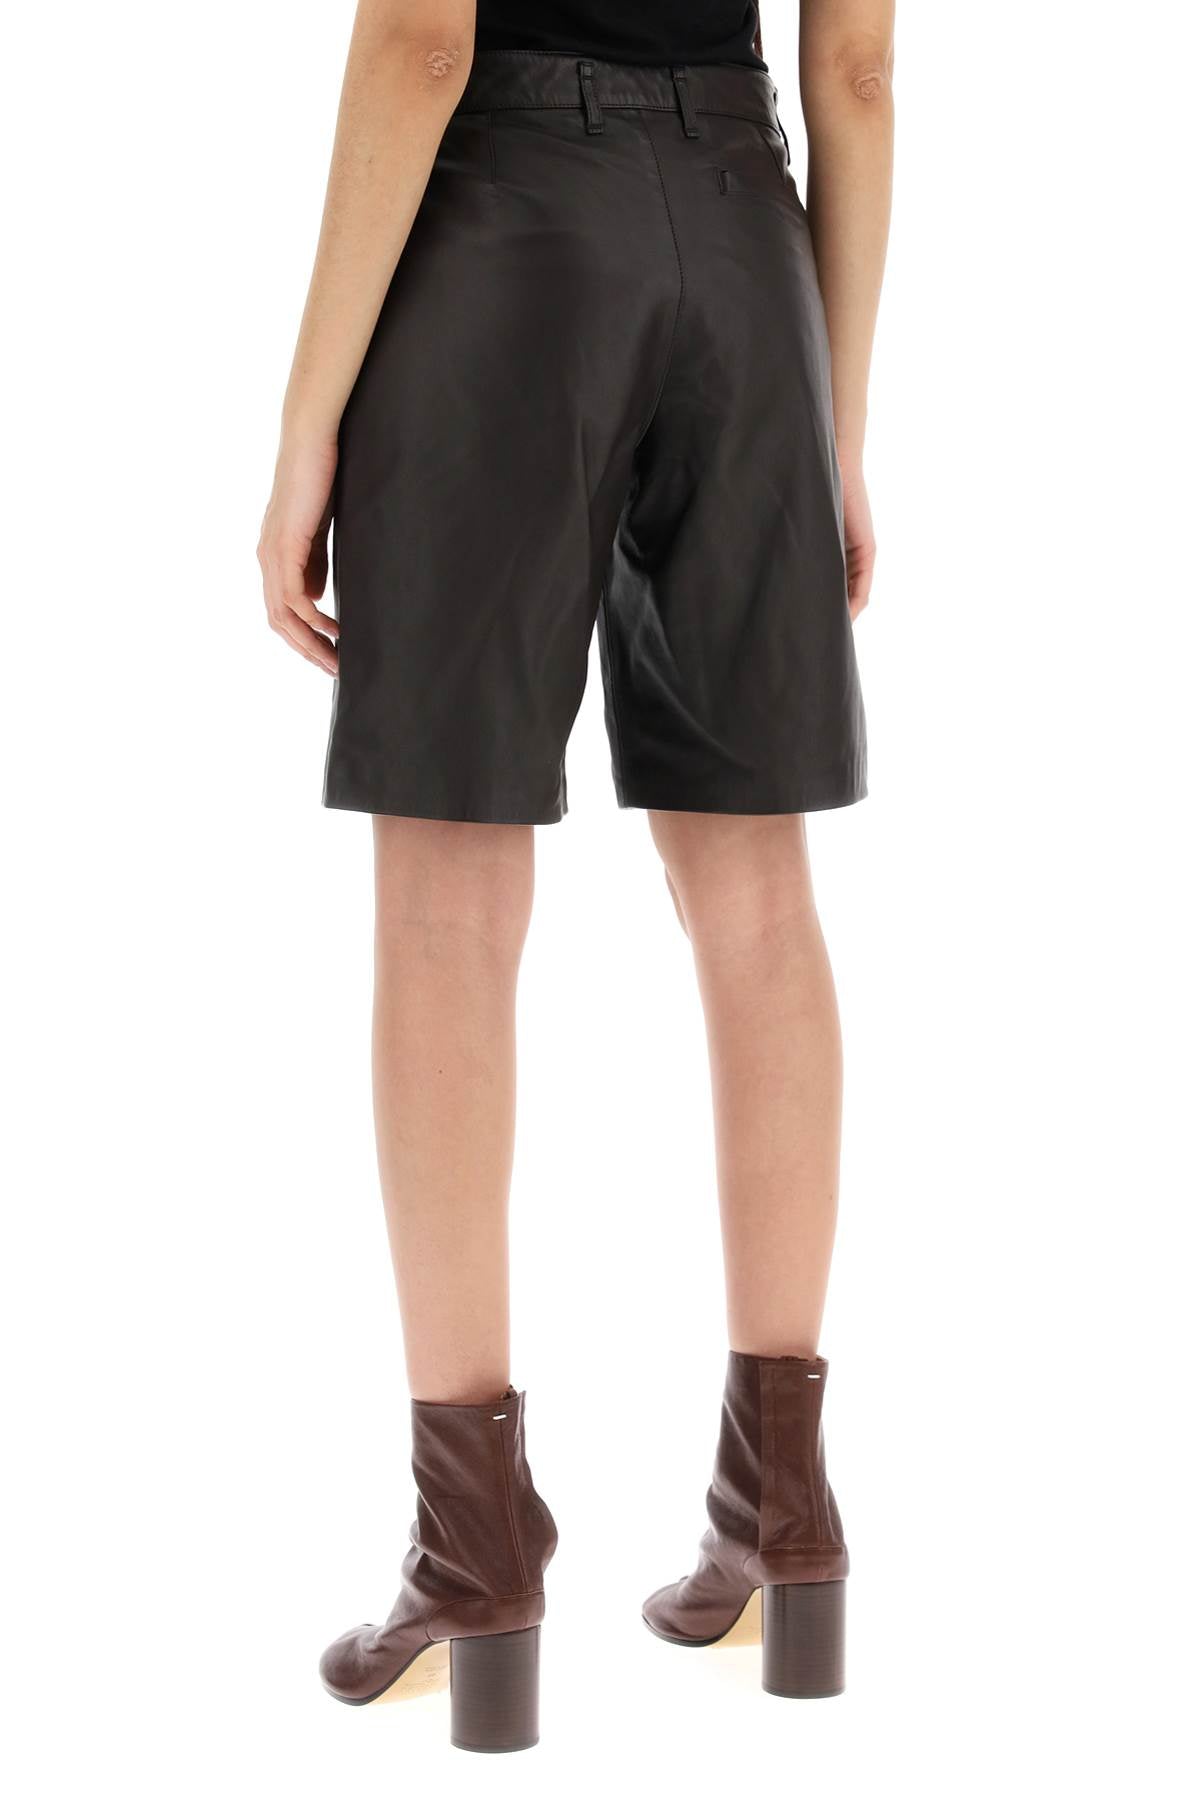 Lemaire Lemaire slim leather bermuda shorts for men